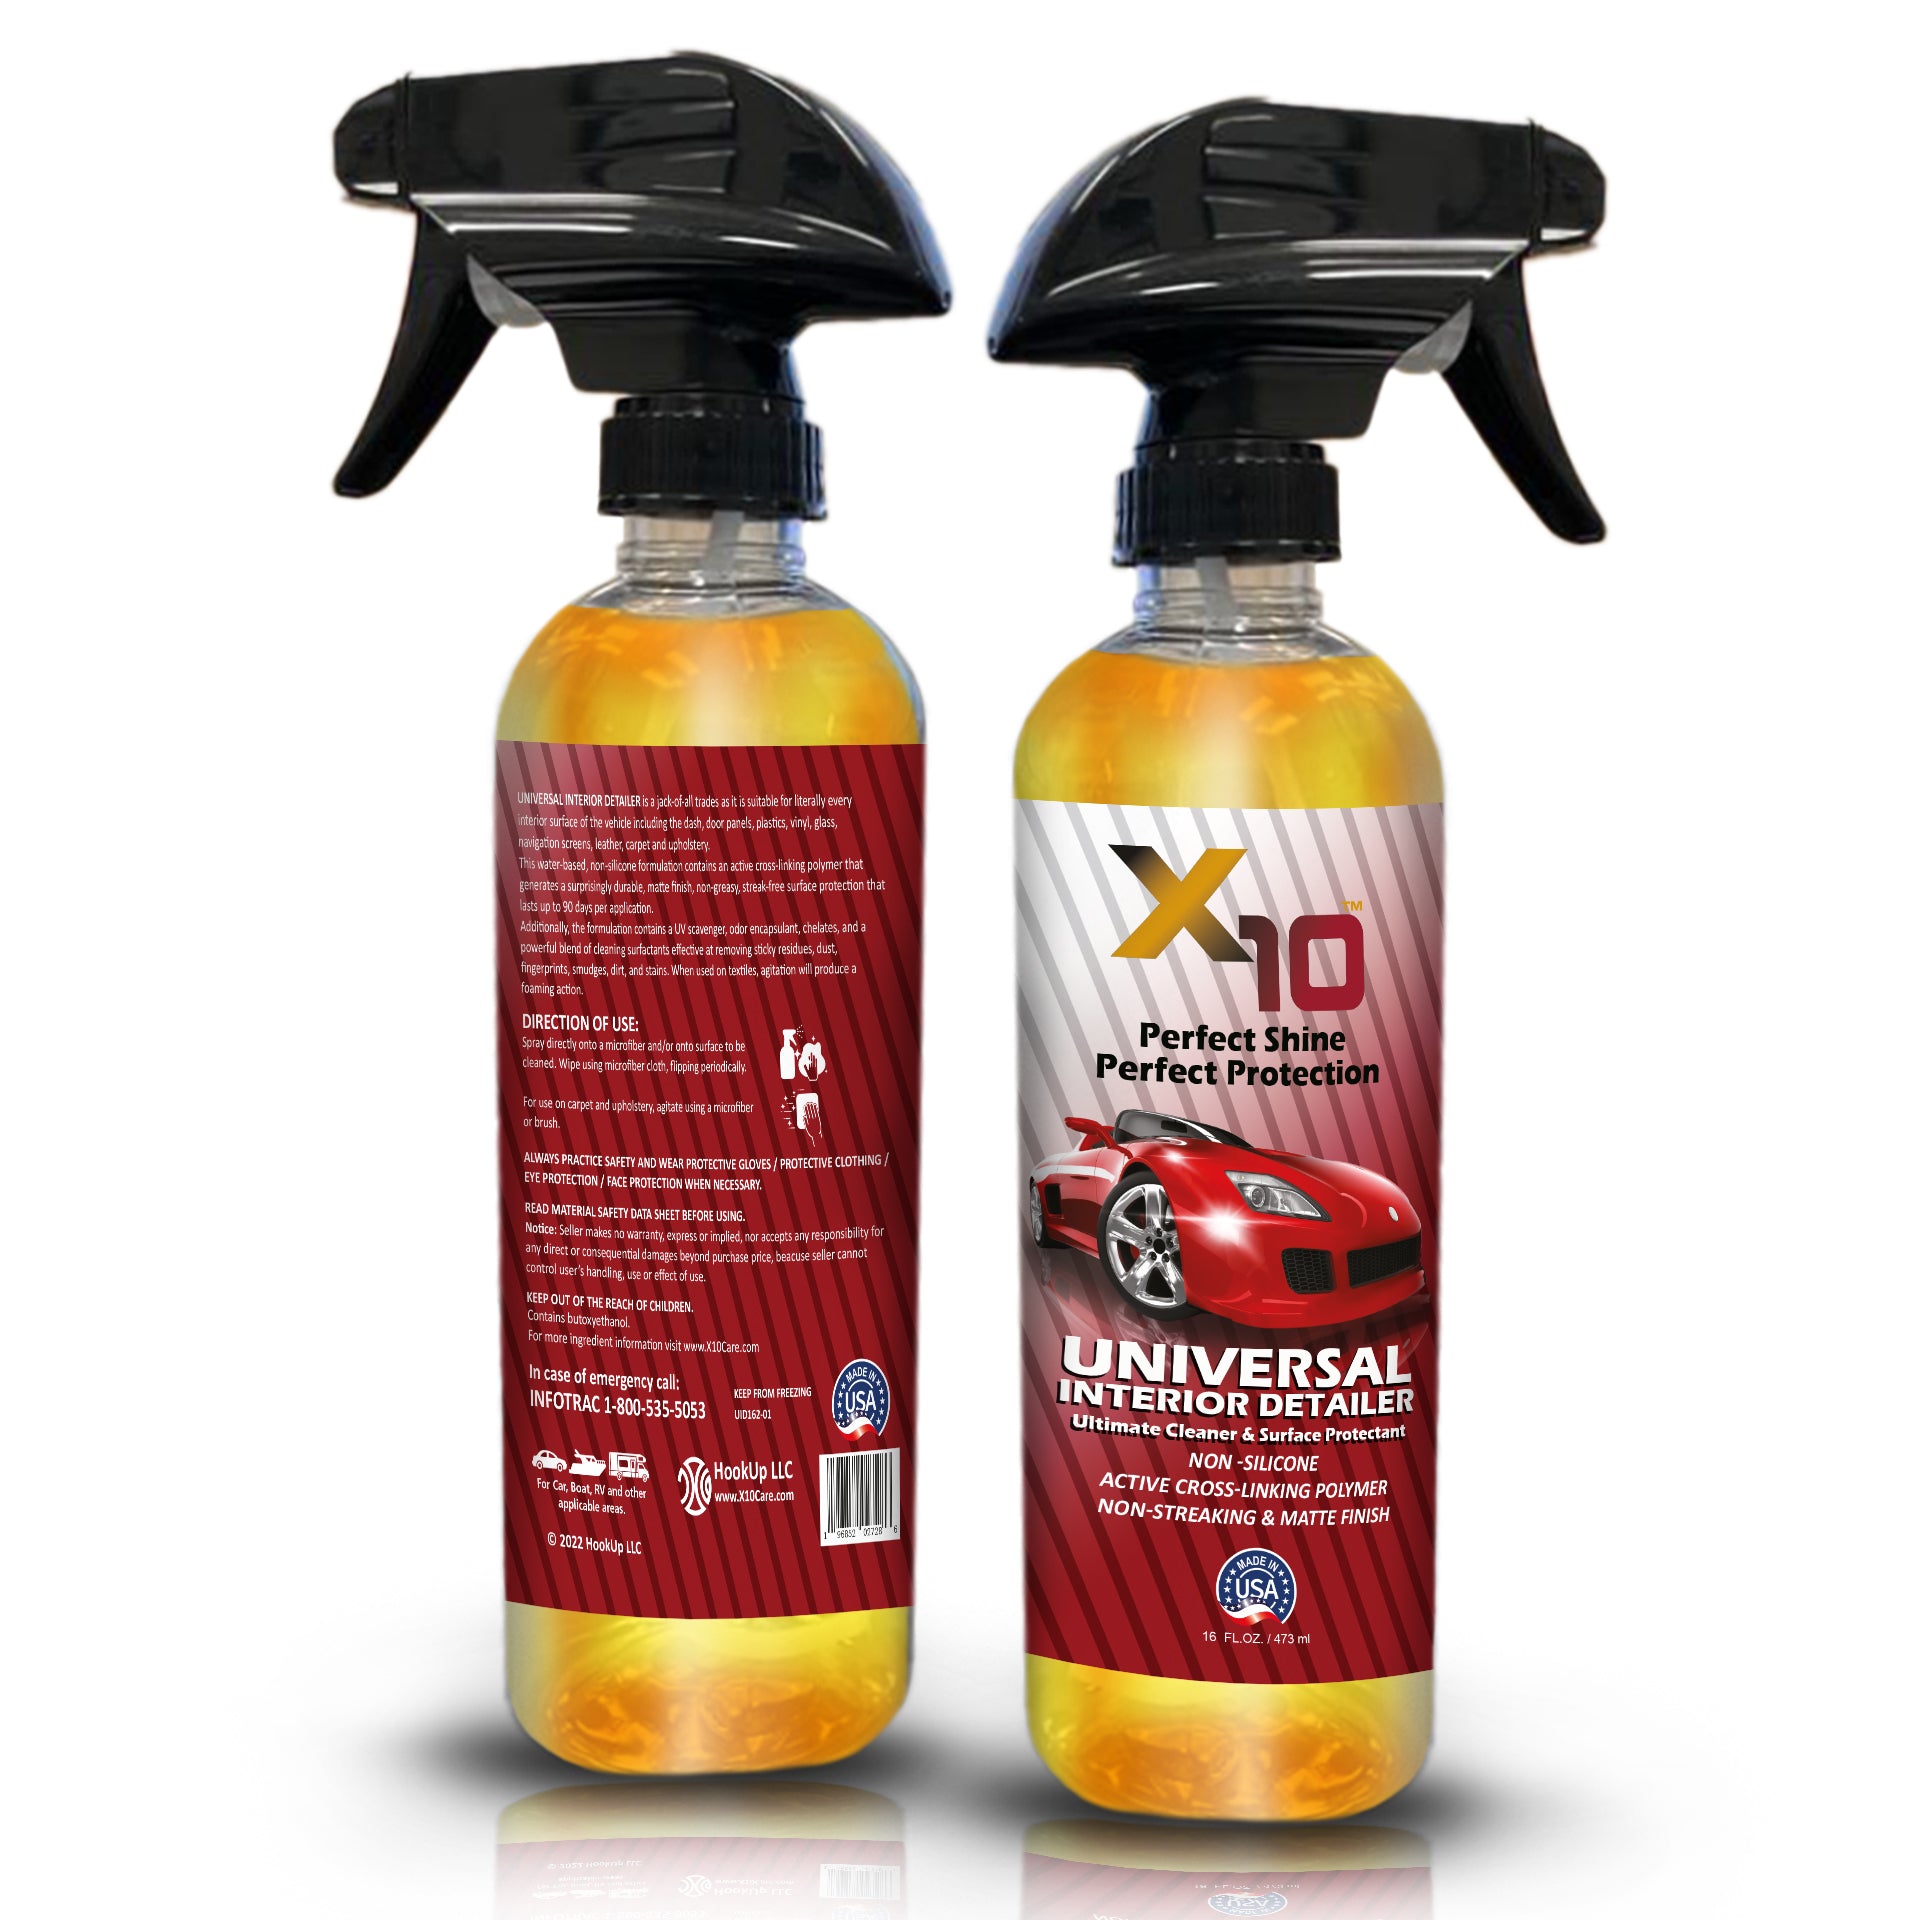 Universal Car Detailing Spray Bottles Top Quality Material